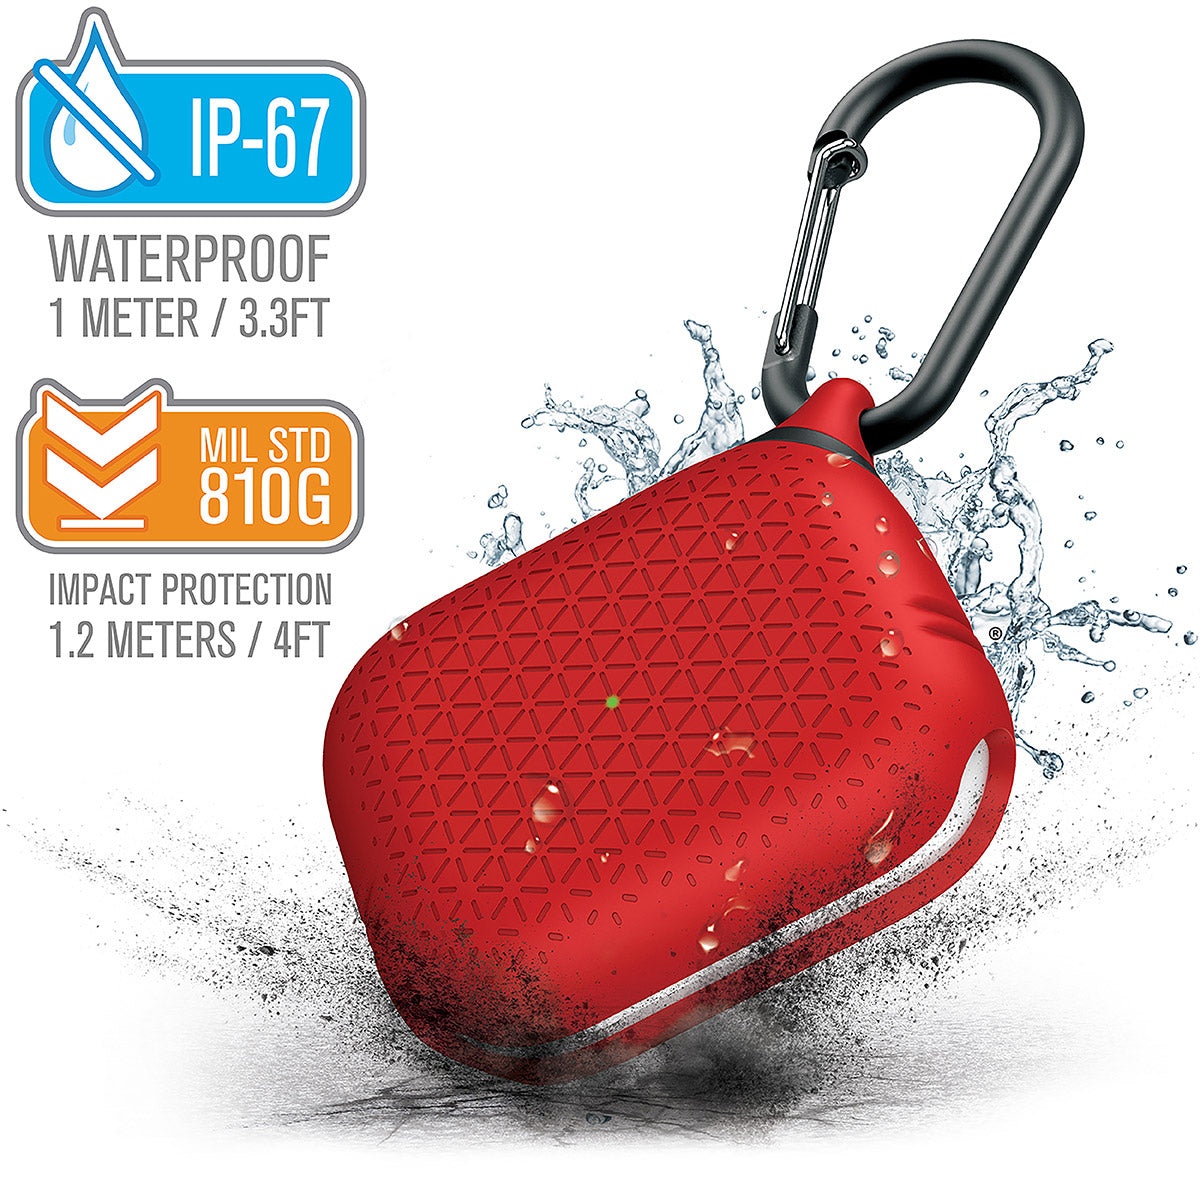 catalyst airpods pro gen 2 1 waterproof case carabiner premium edition flame red with cracked floor and splashes of water text reads ip-67 waterproof 1 meter 3.3ft mil std 810g impact protection 1.2 meters 4ft